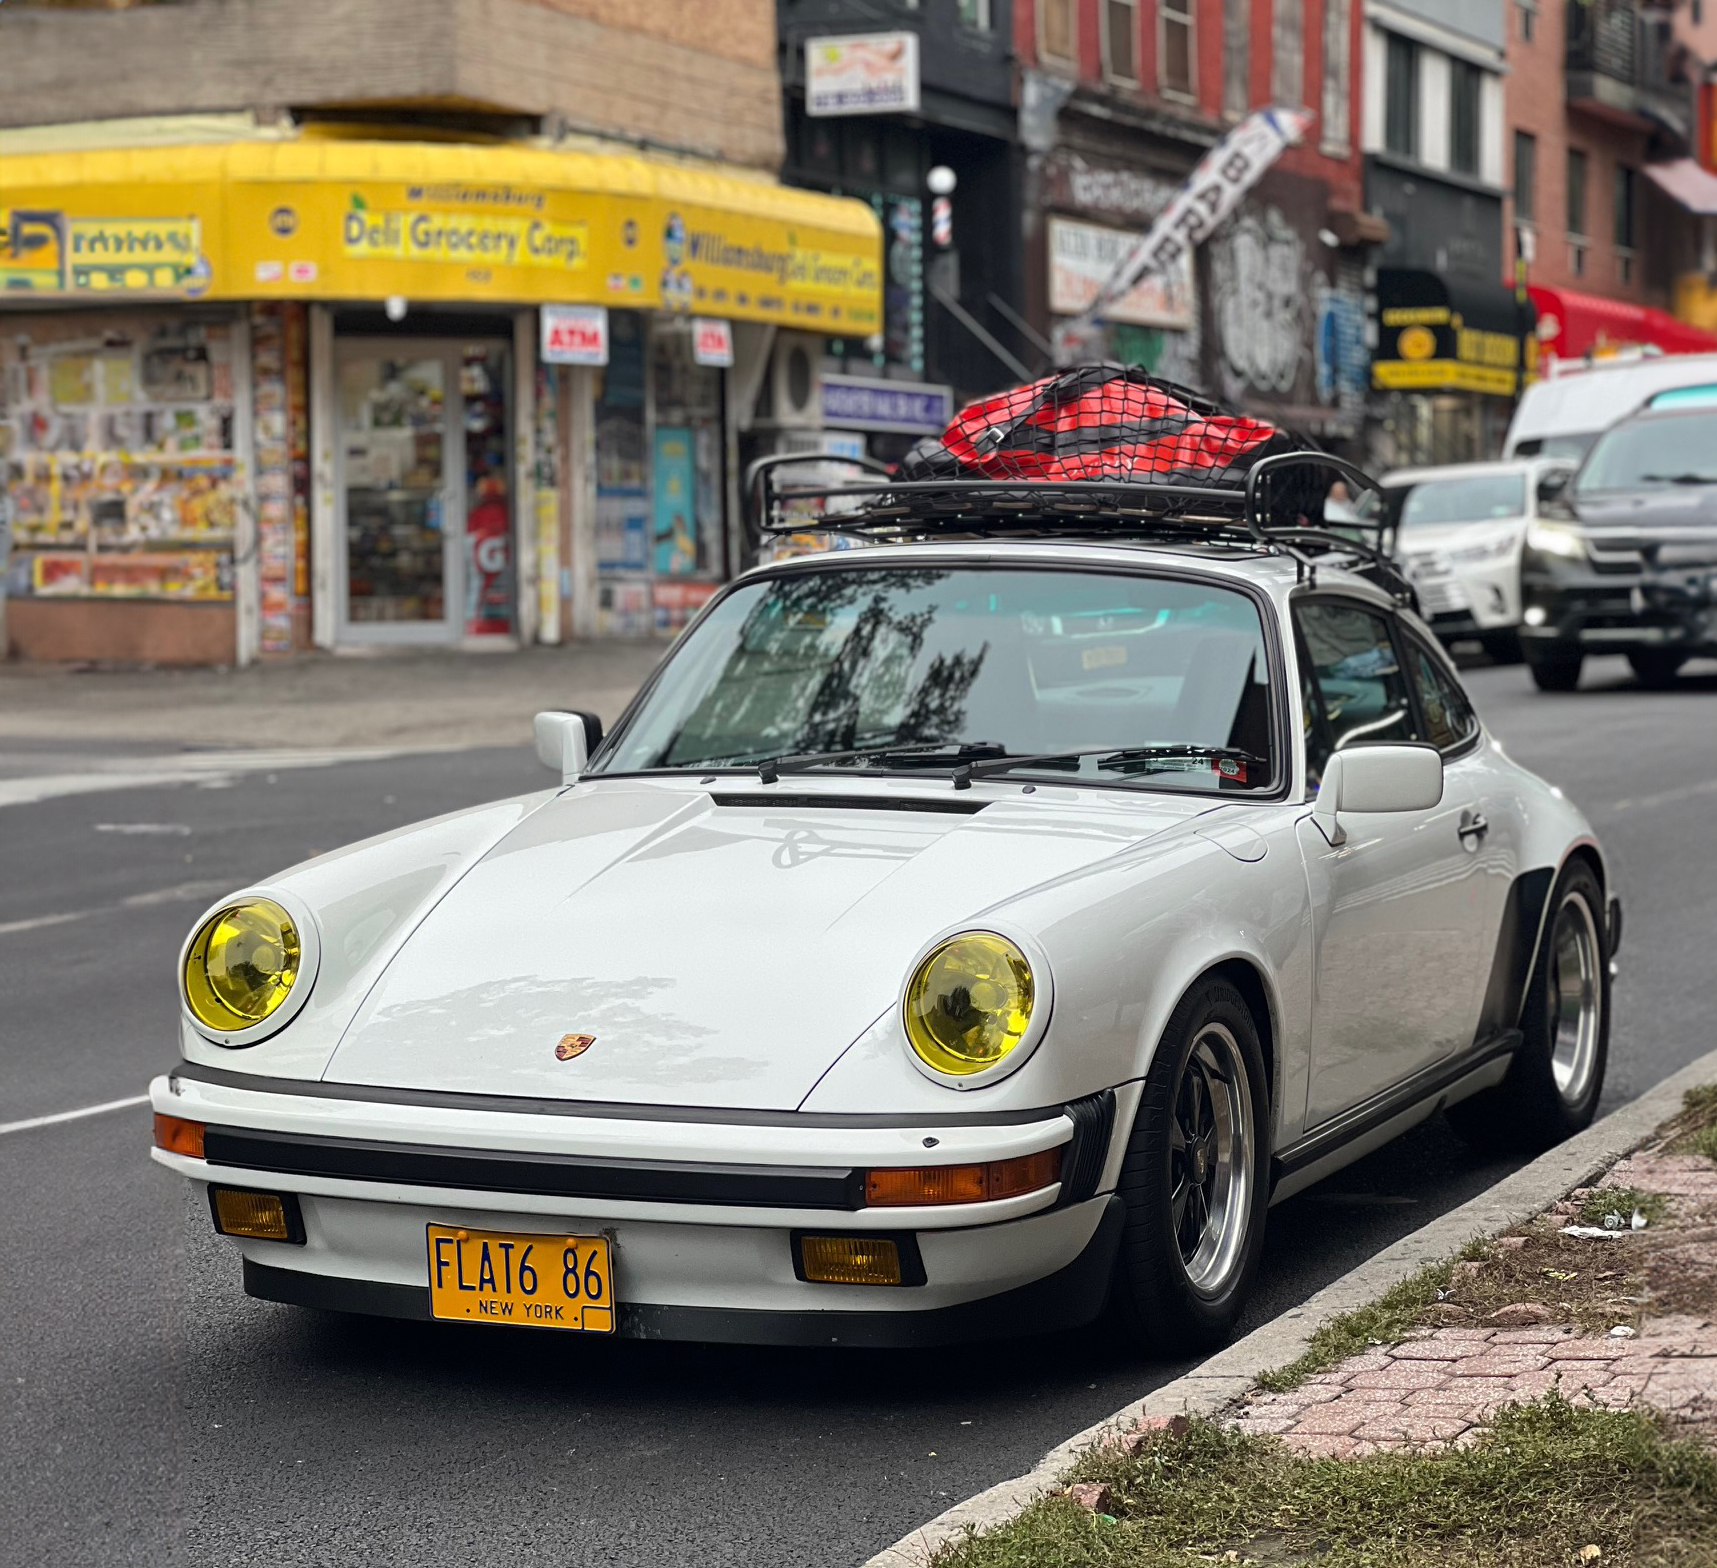 White Porsche 911 (type G-series) on road with roof rack